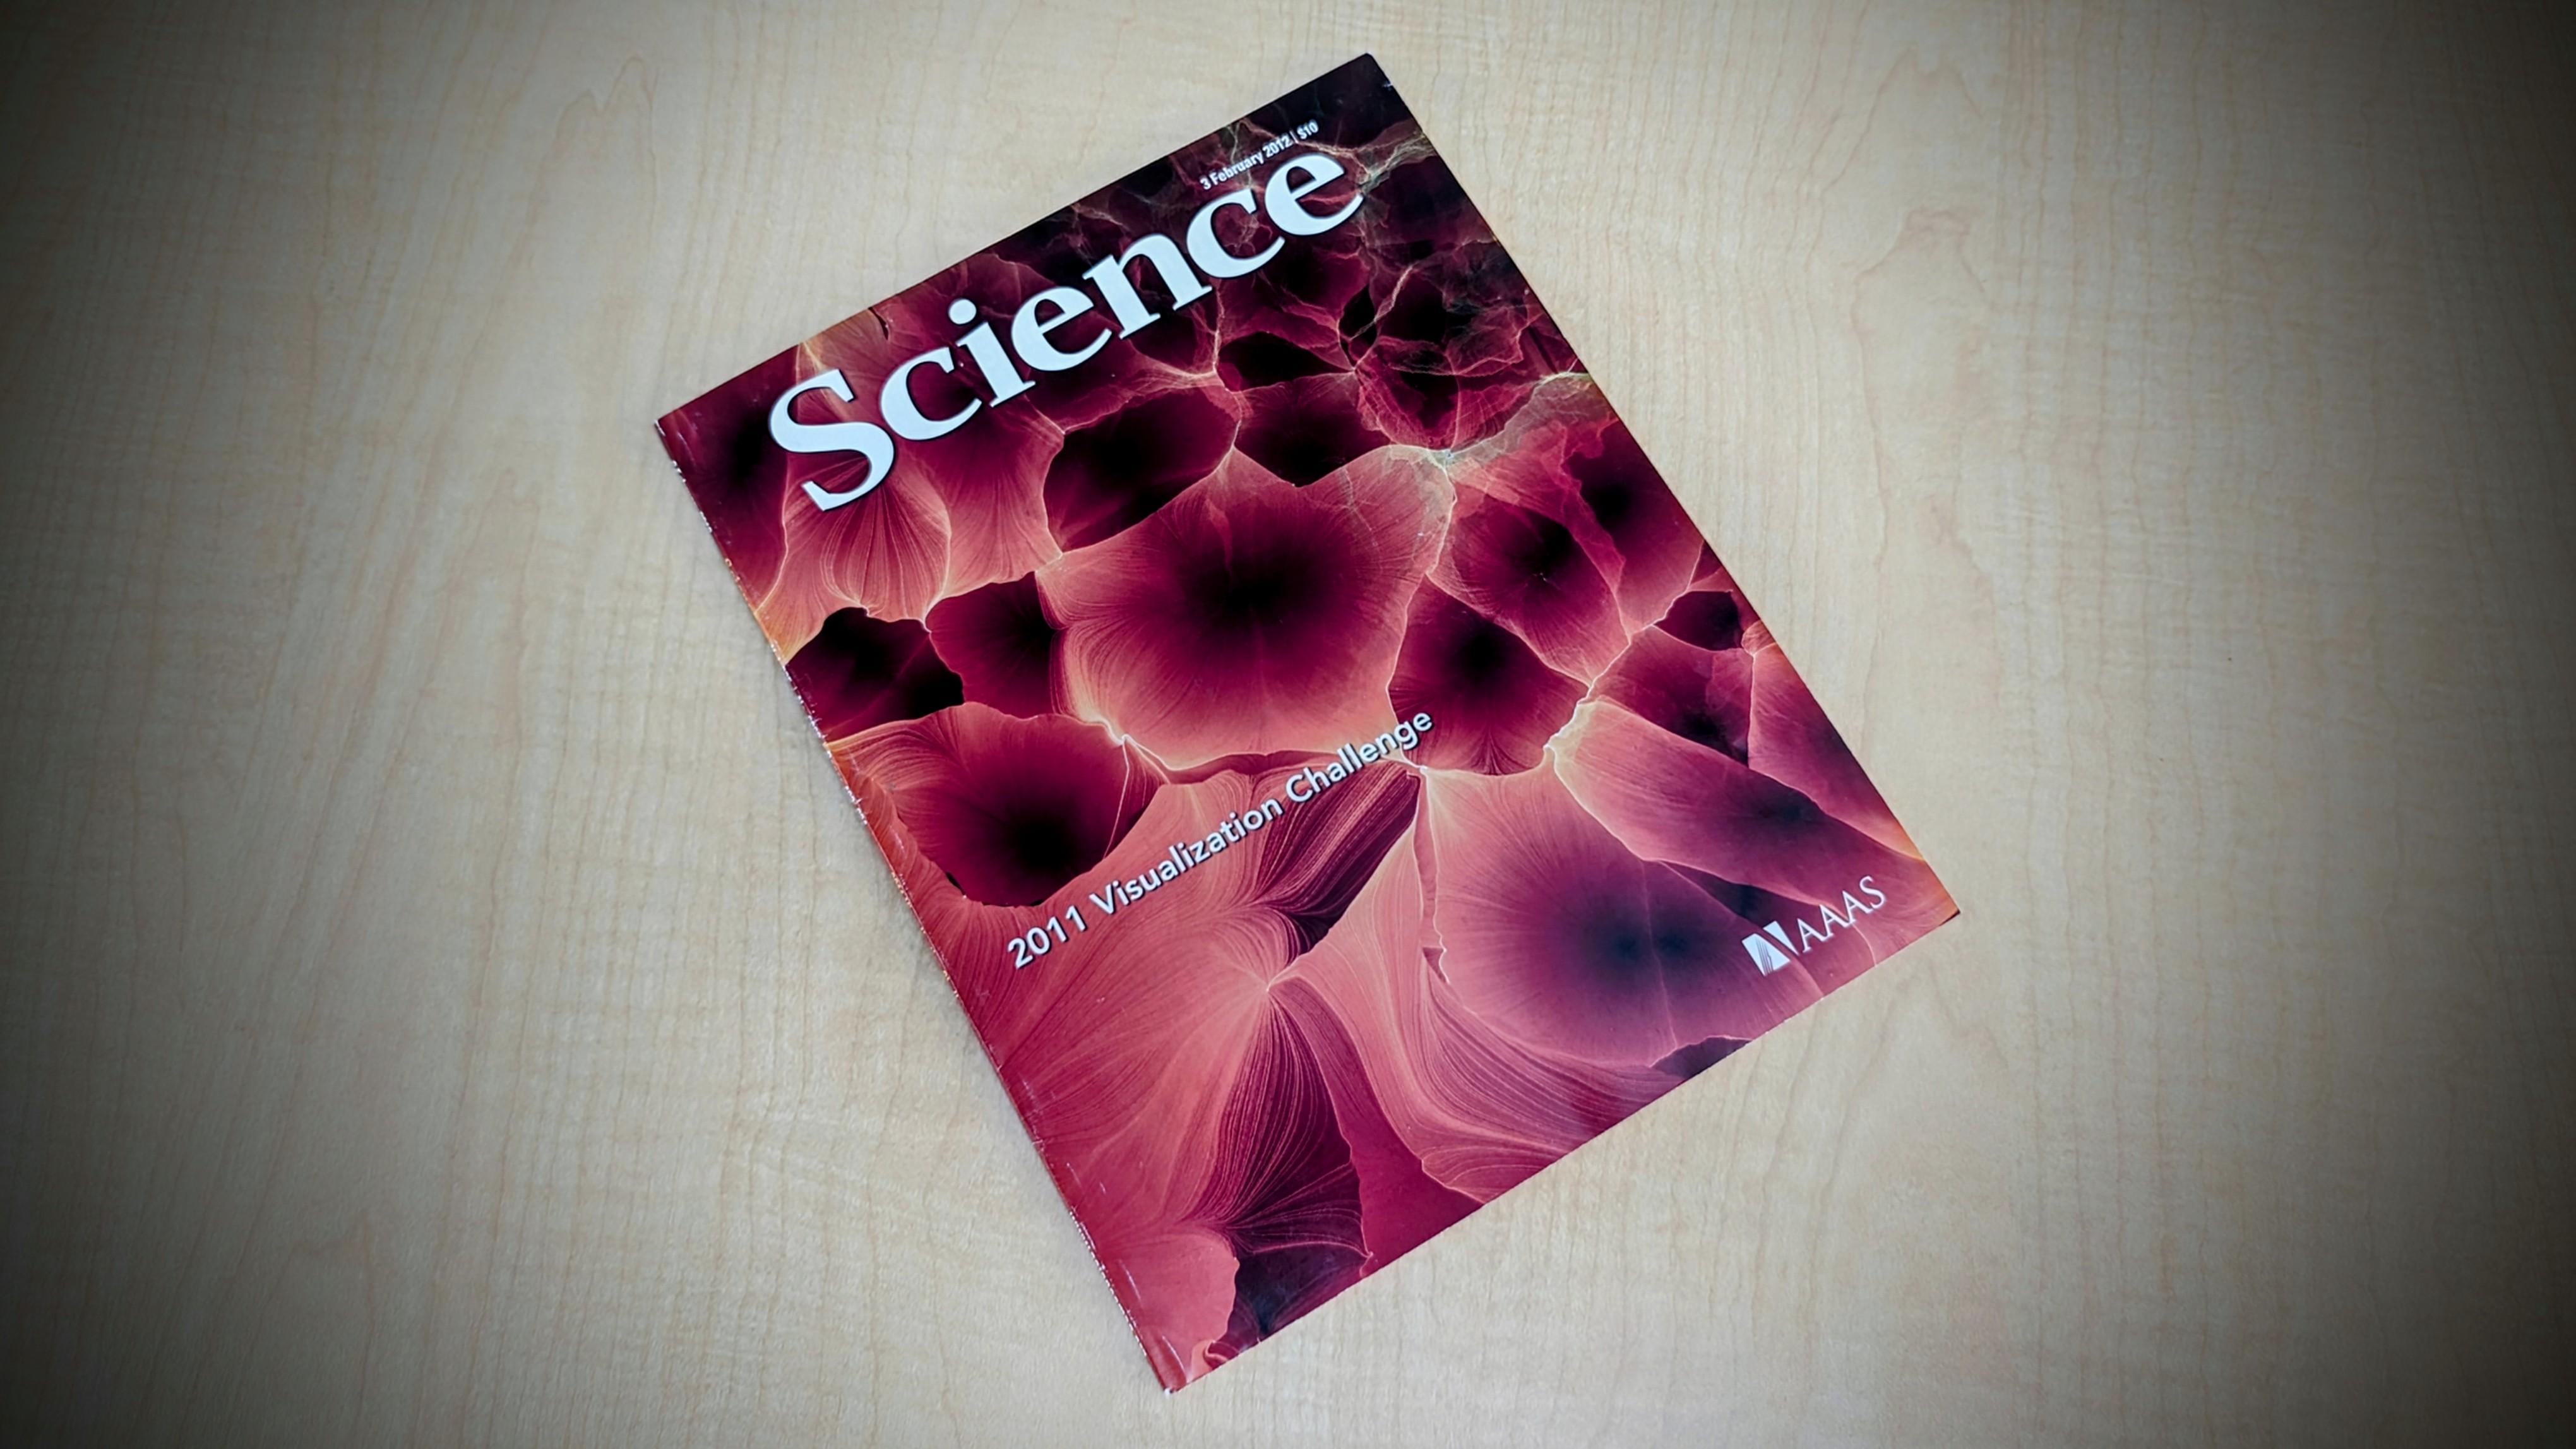 A photograph of an issue of the journal Science.